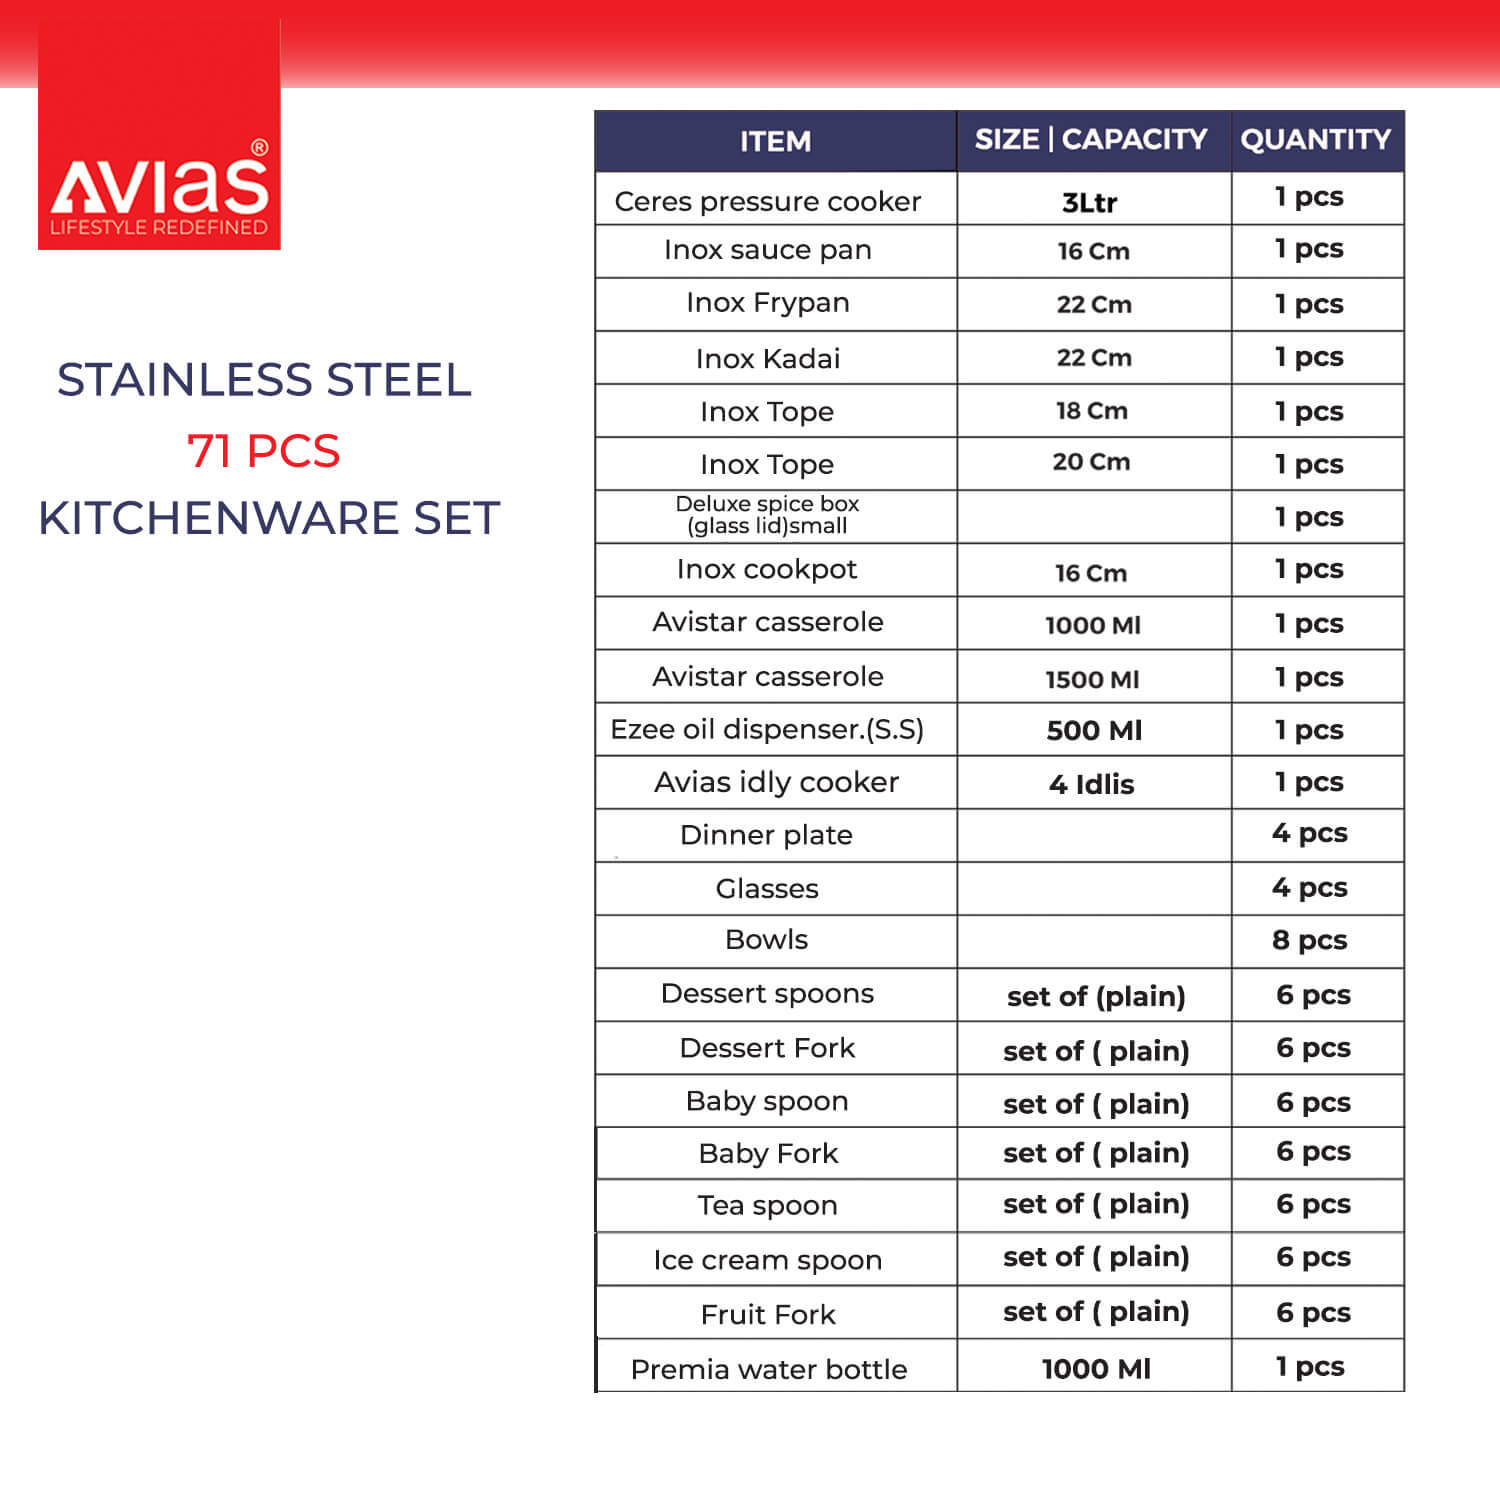 Stainless Steel 71 PCS Kitchen Set size, capacity and quantity